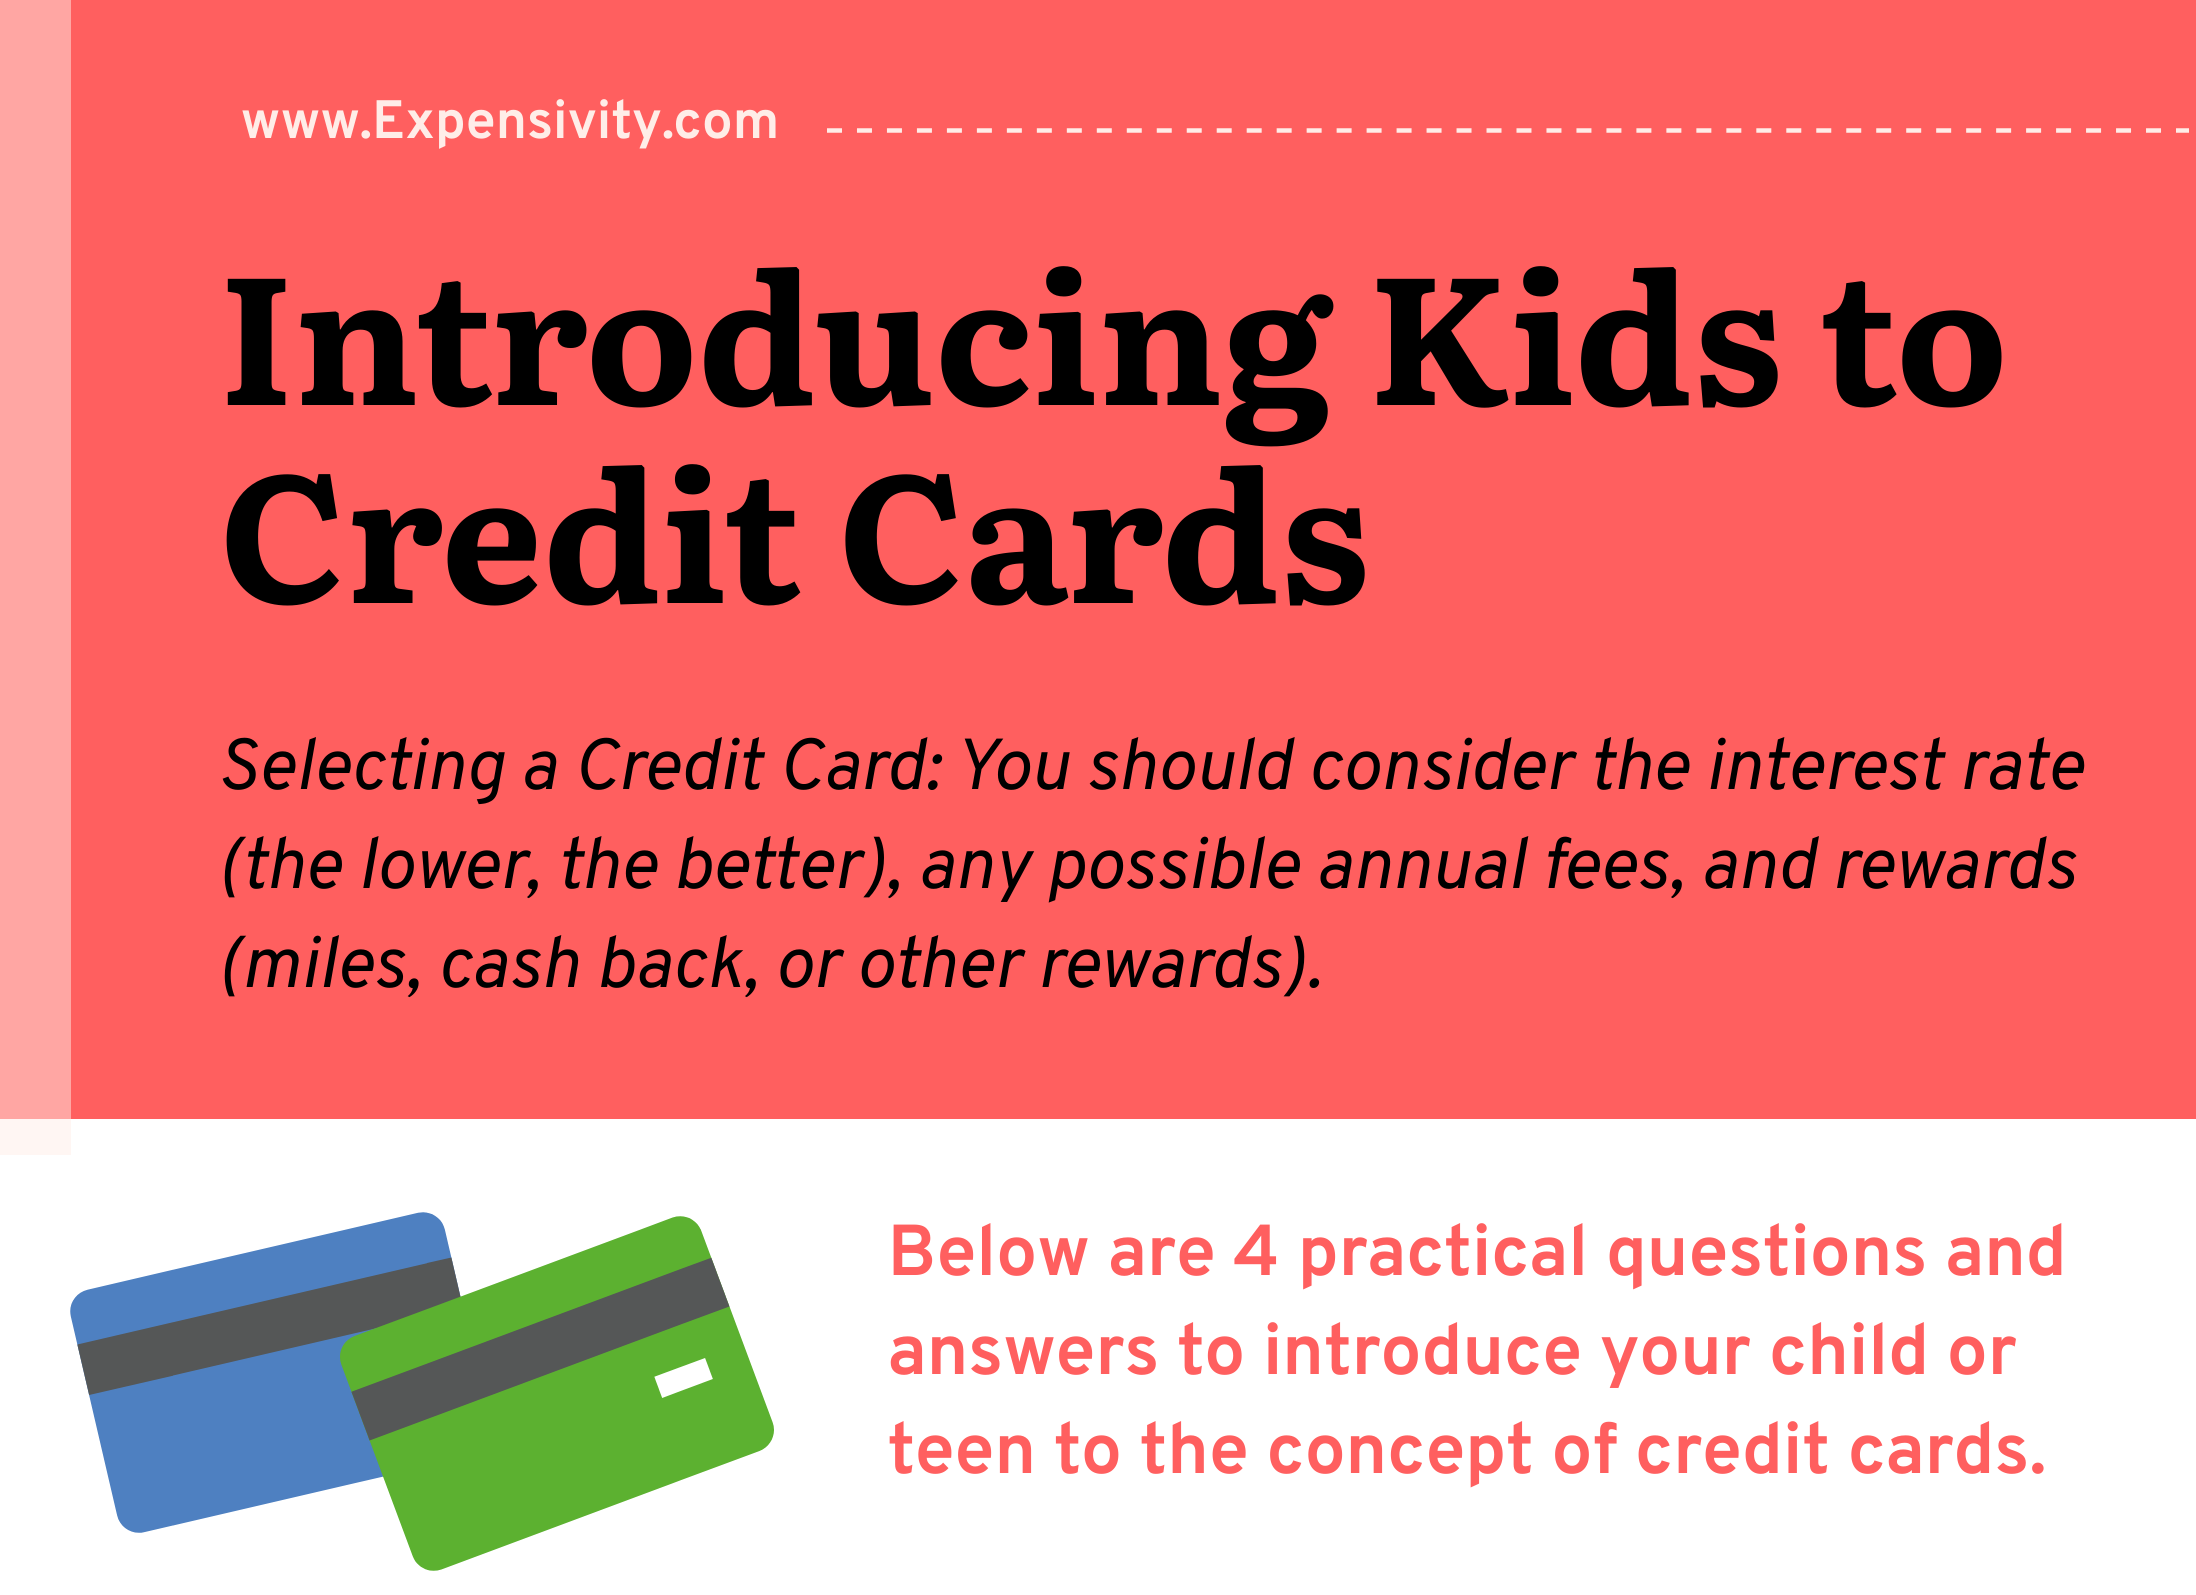 Graphic image on how to introduce credit cards to kids